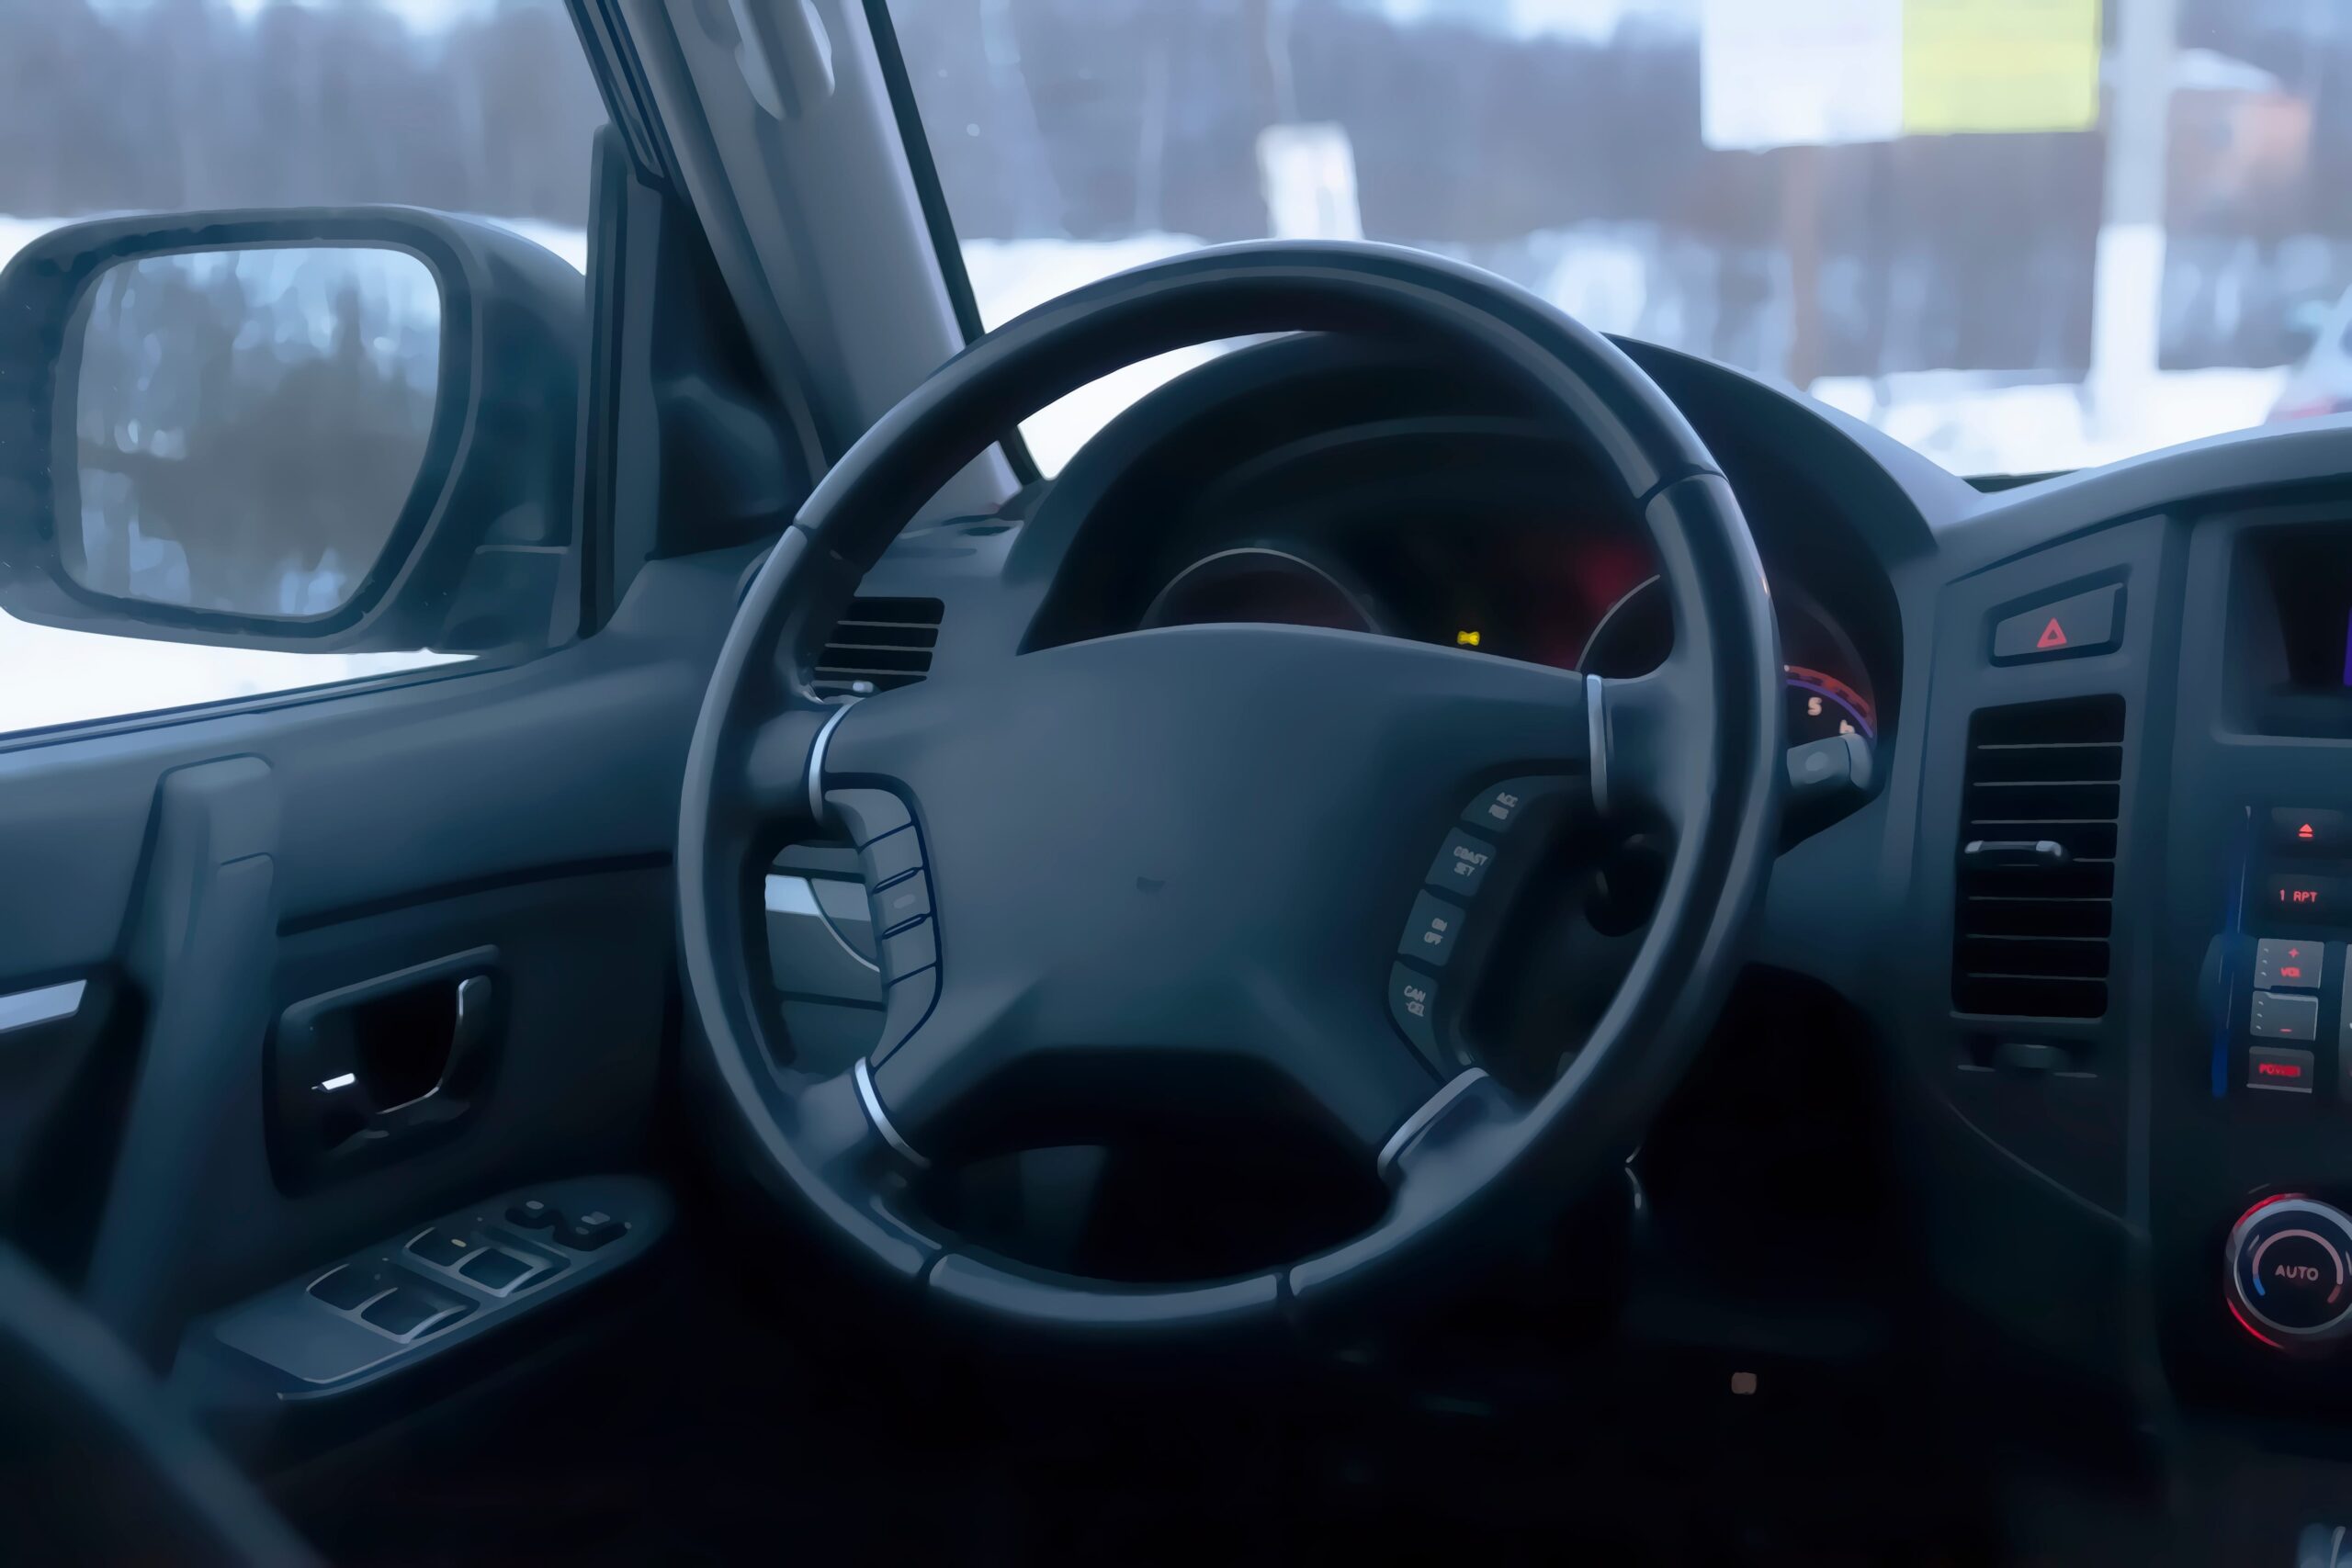 The interior of a self-driving car.